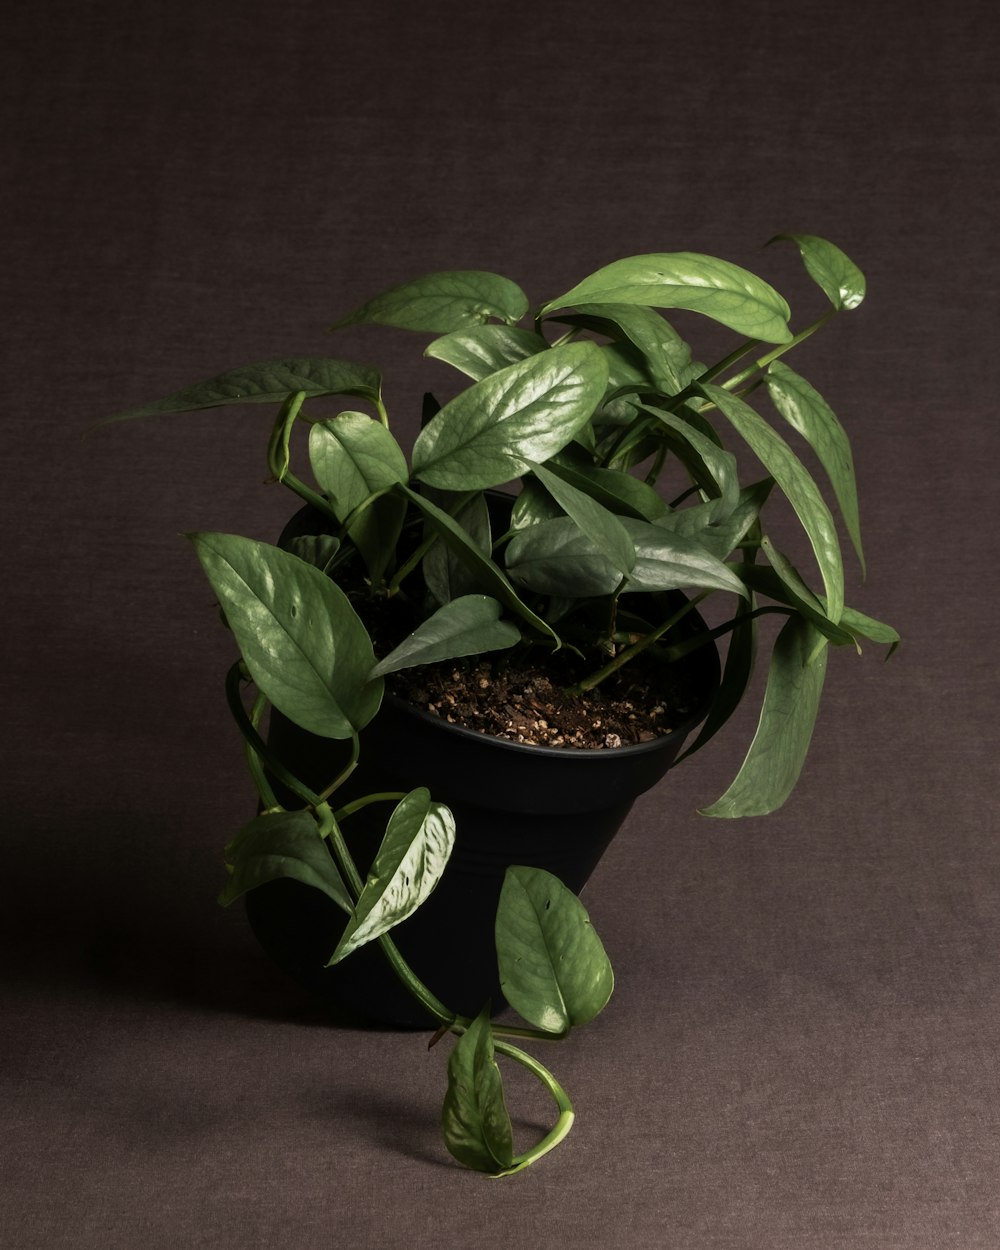 a potted plant with green leaves on a dark background